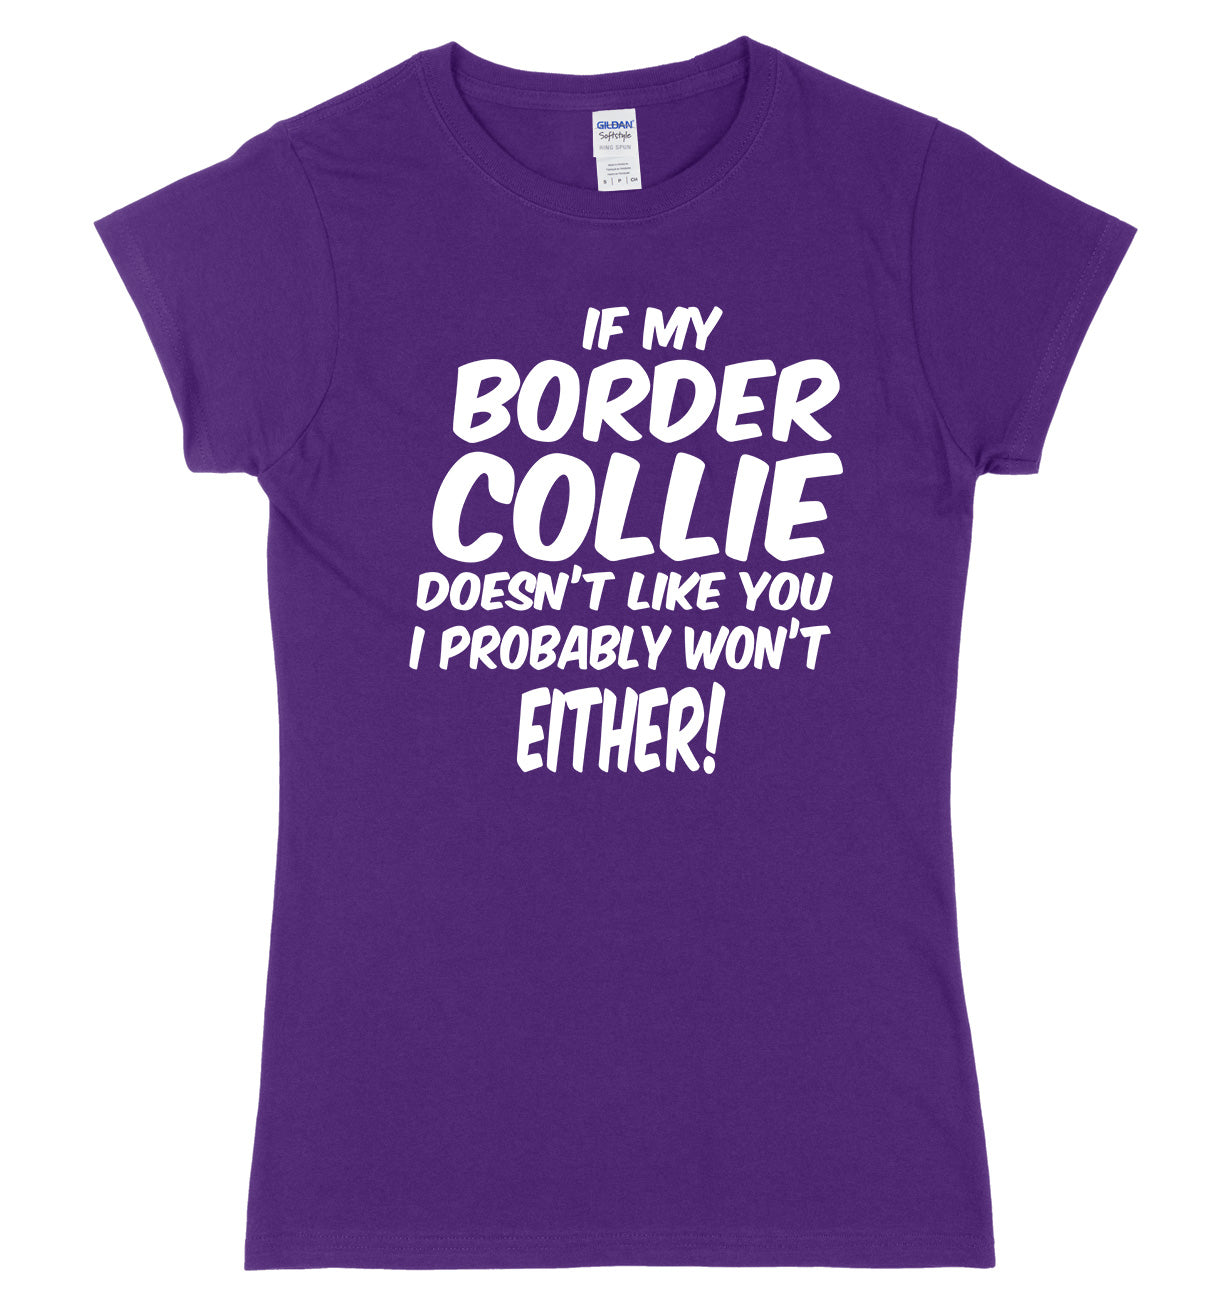 IF MY BORDER COLLIE DOESN'T LIKE YOU I PROBABLY WON'T EITHER FUNNY WOMENS LADIES SLIM FIT  T-SHIRT